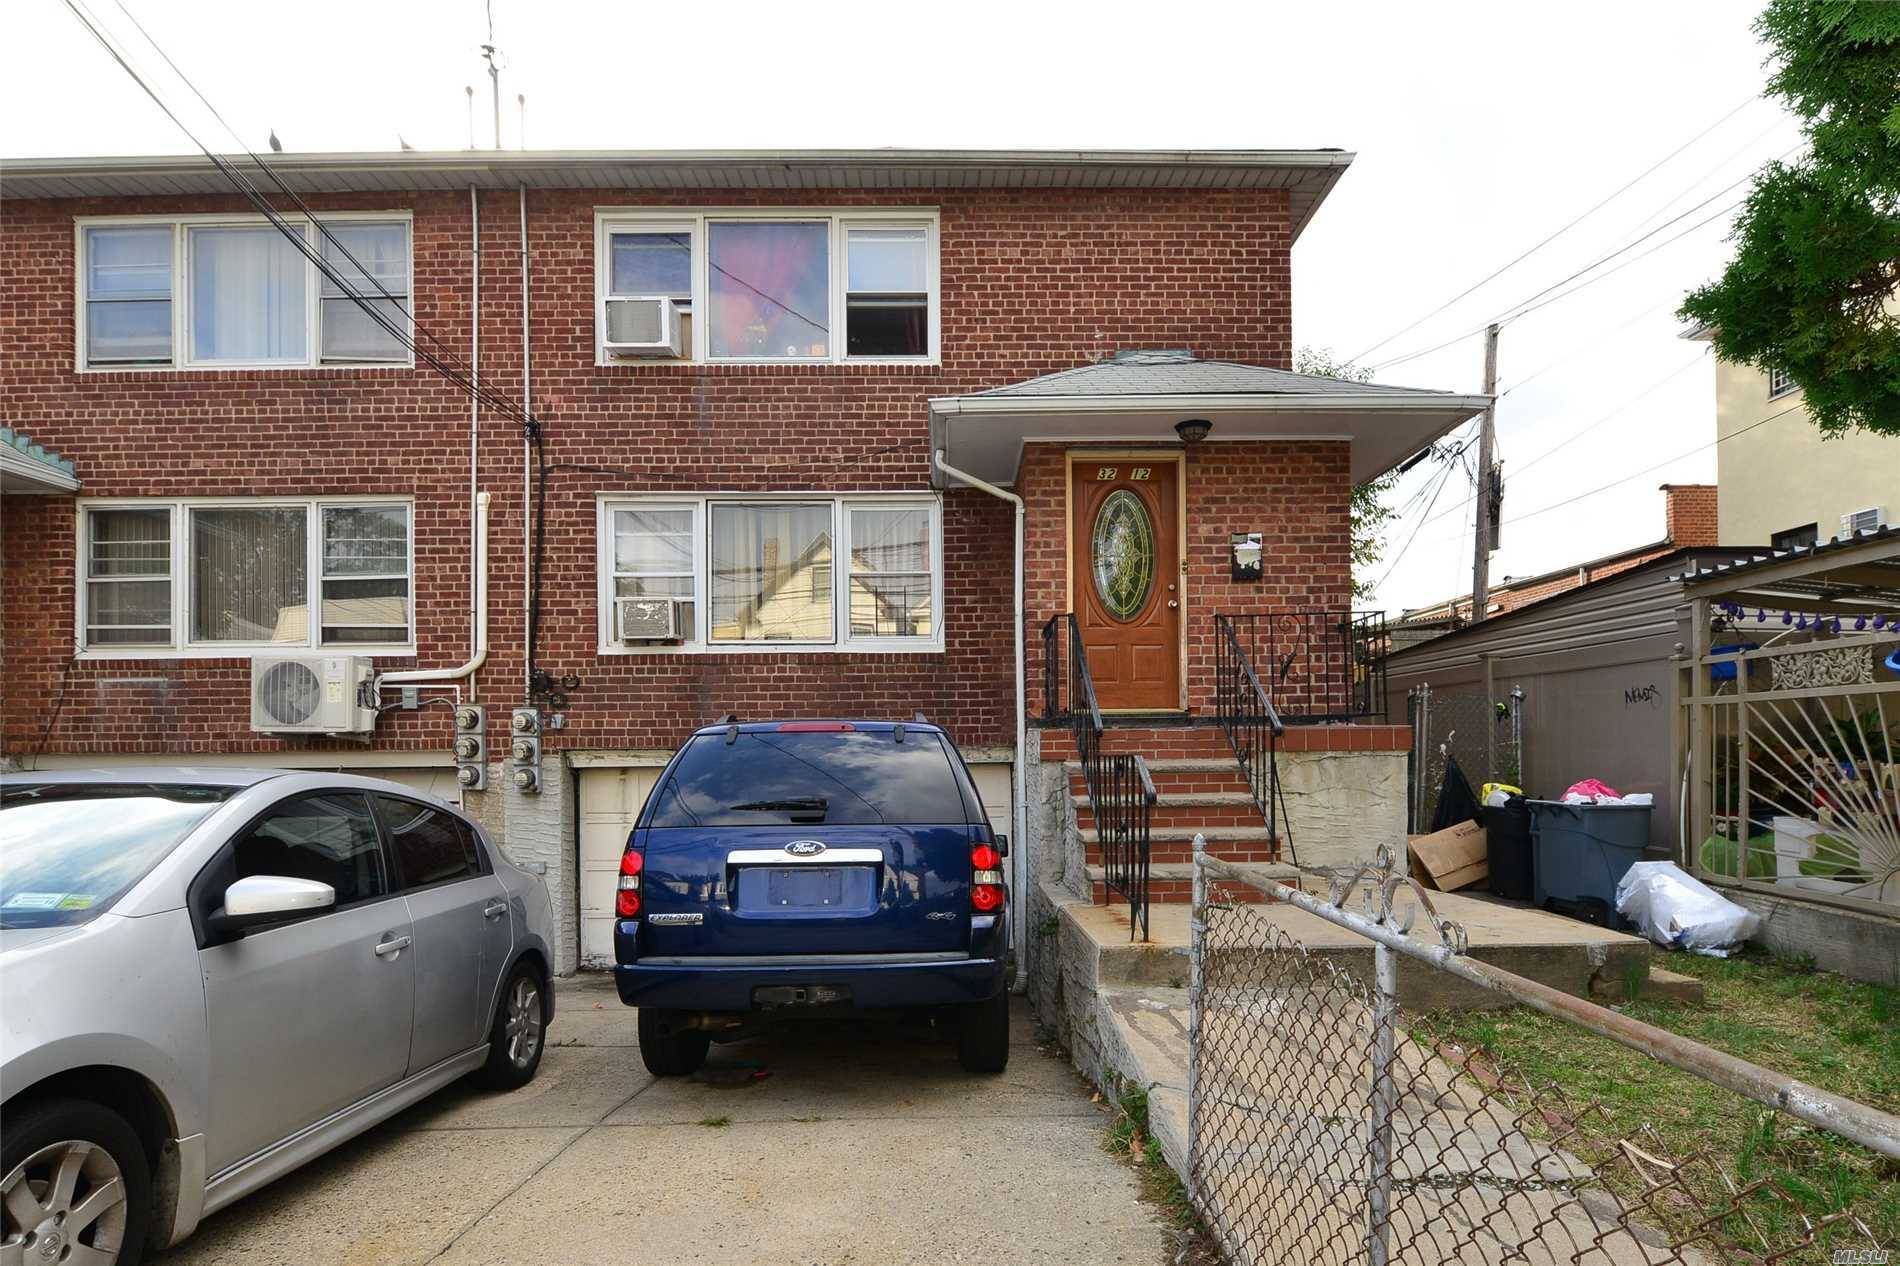 Two Family In The Heart Of East Elmhurst Is The Finest Investment Available.